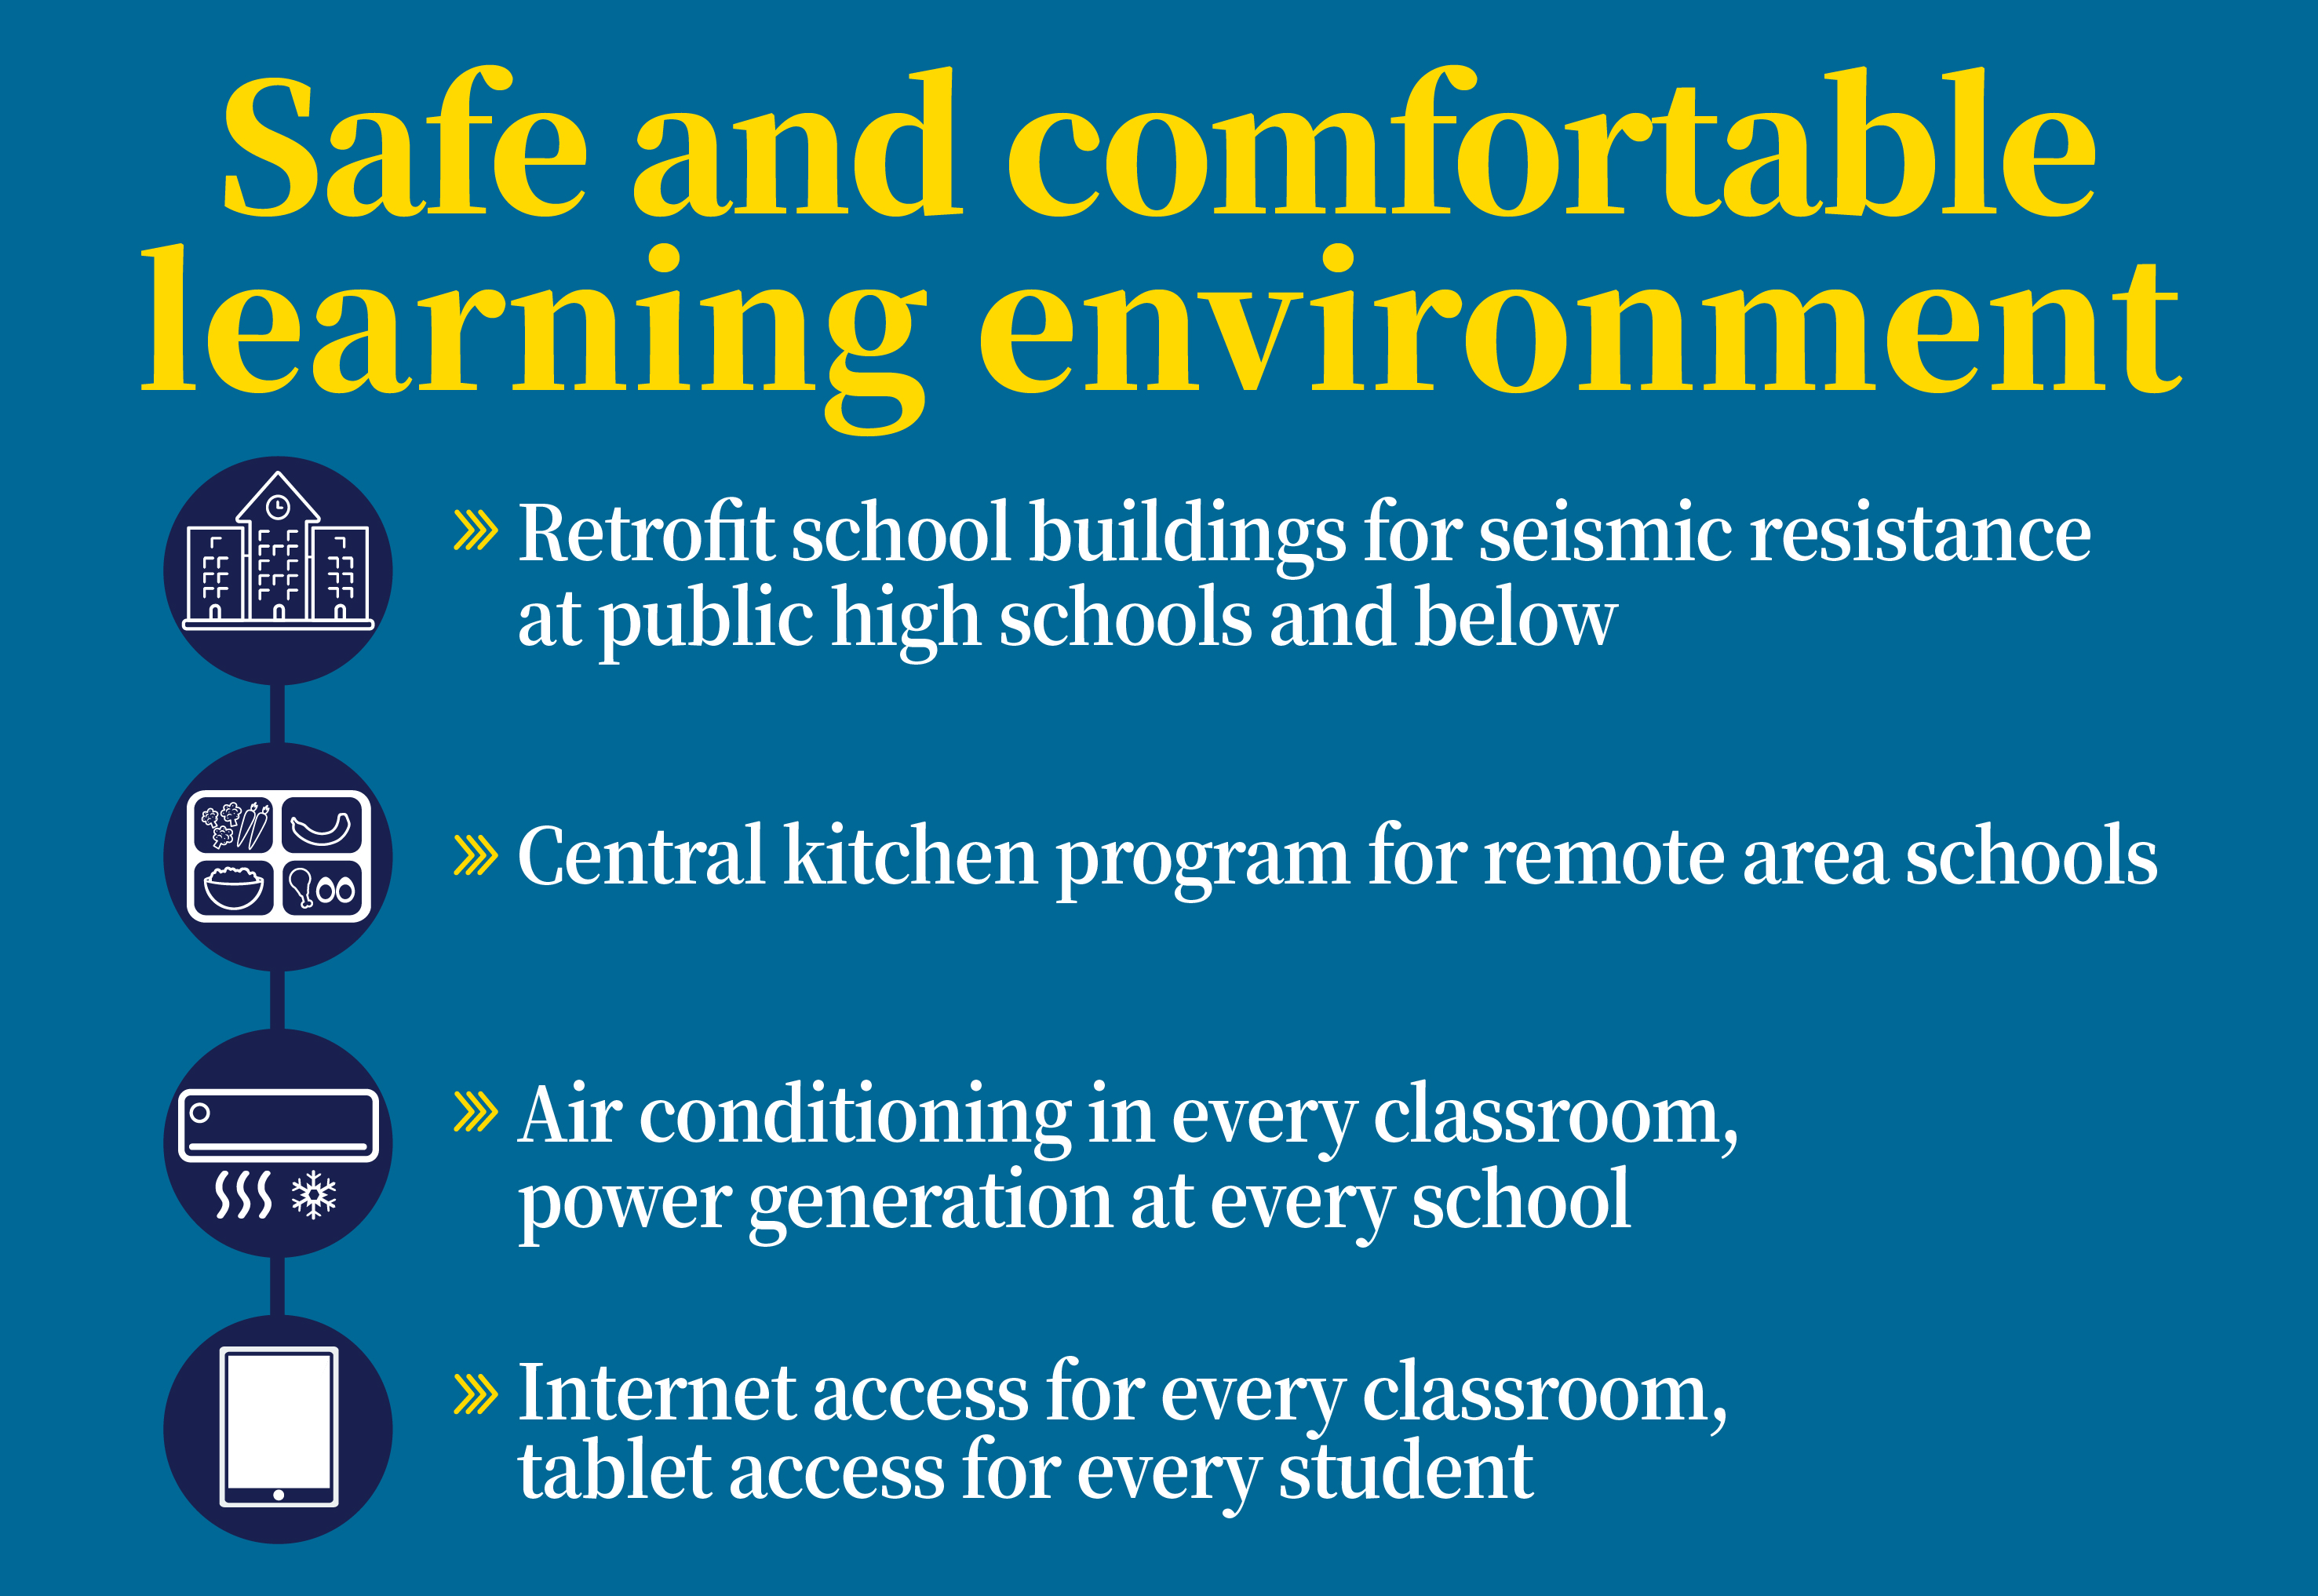 Creating a safe and comfortable learning environment